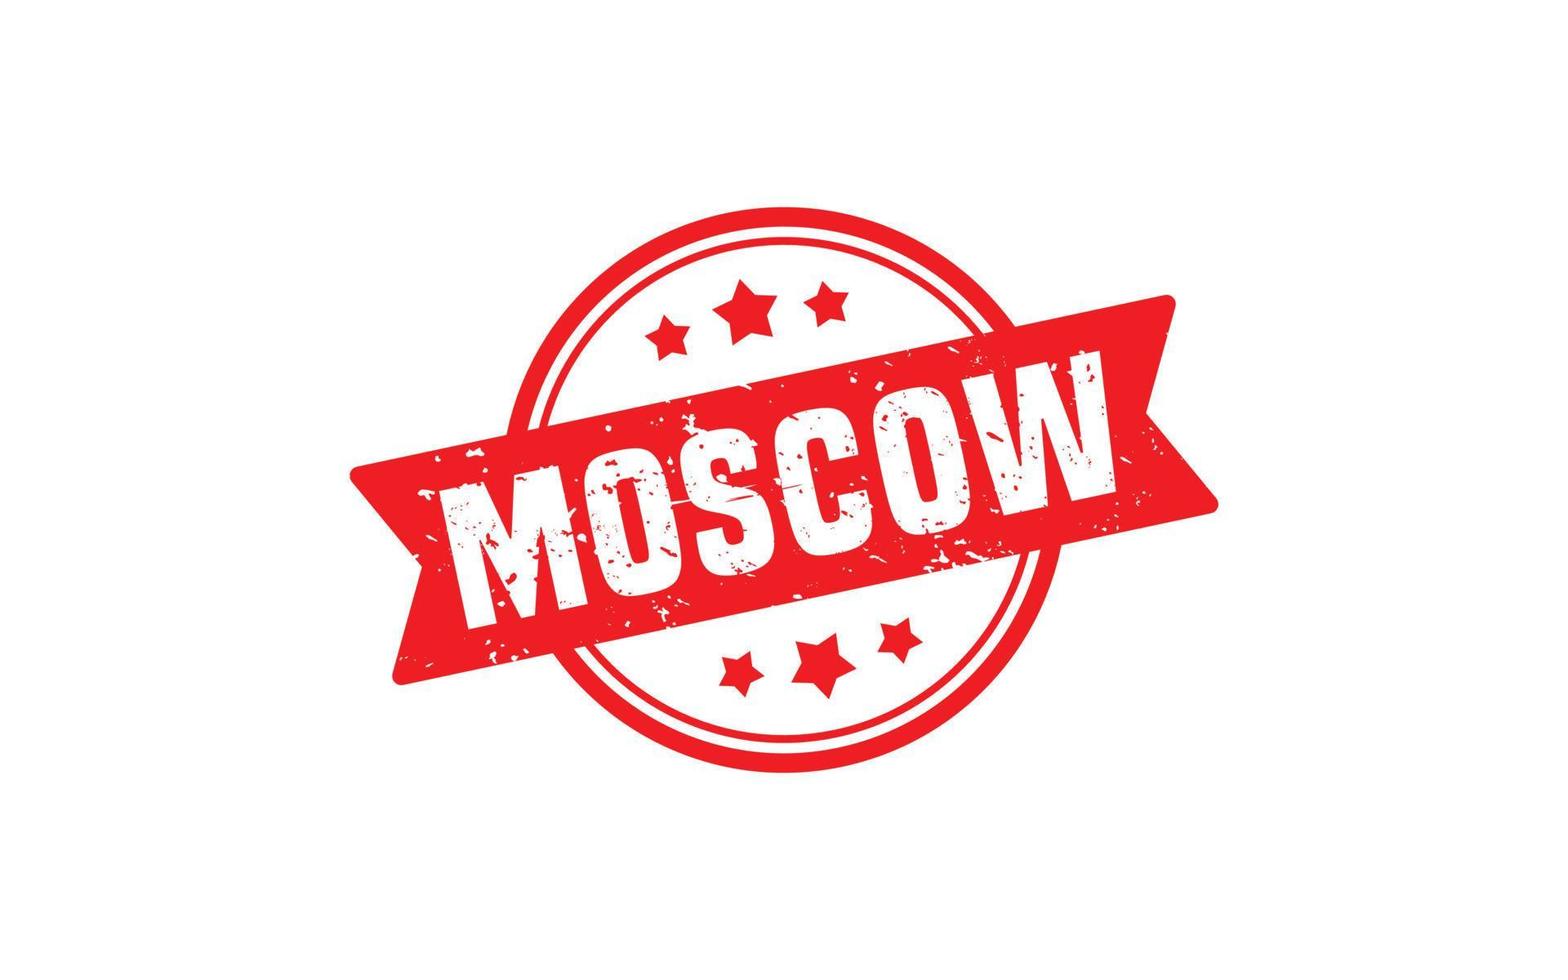 MOSCOW RUSSIA rubber stamp texture with grunge style on white background vector